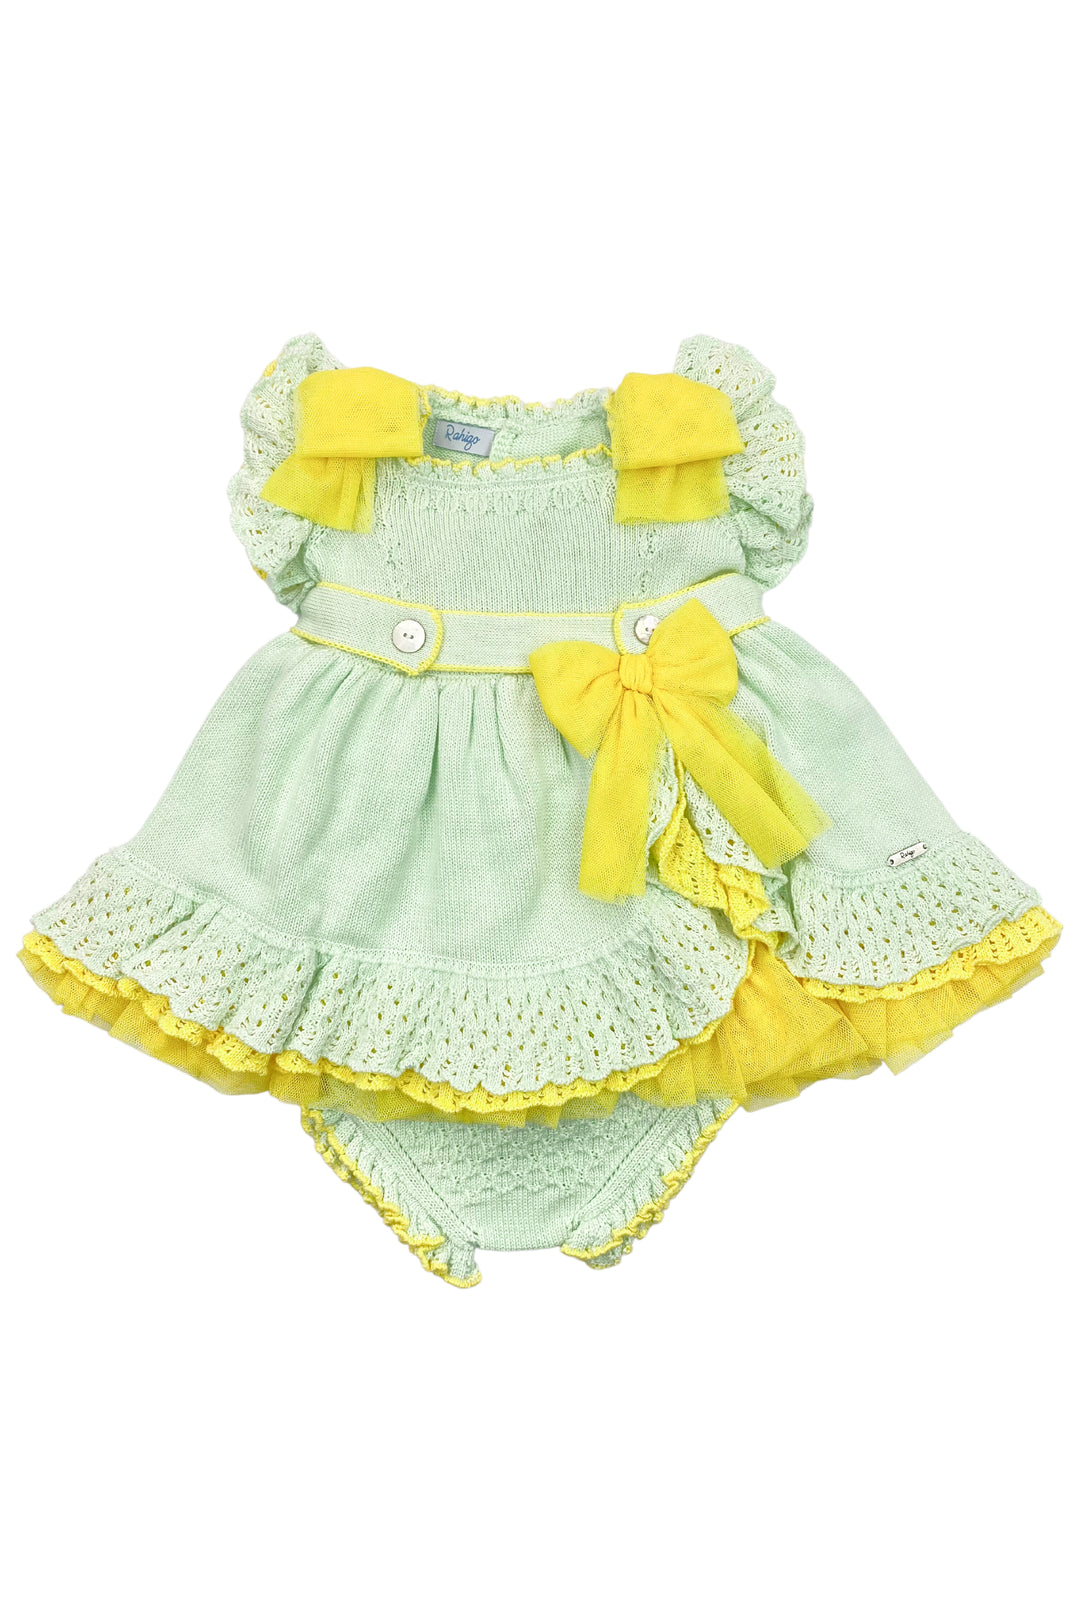 Rahigo "Beatrice" Mint & Yellow Knit Tulle Dress & Bloomers | iphoneandroidapplications